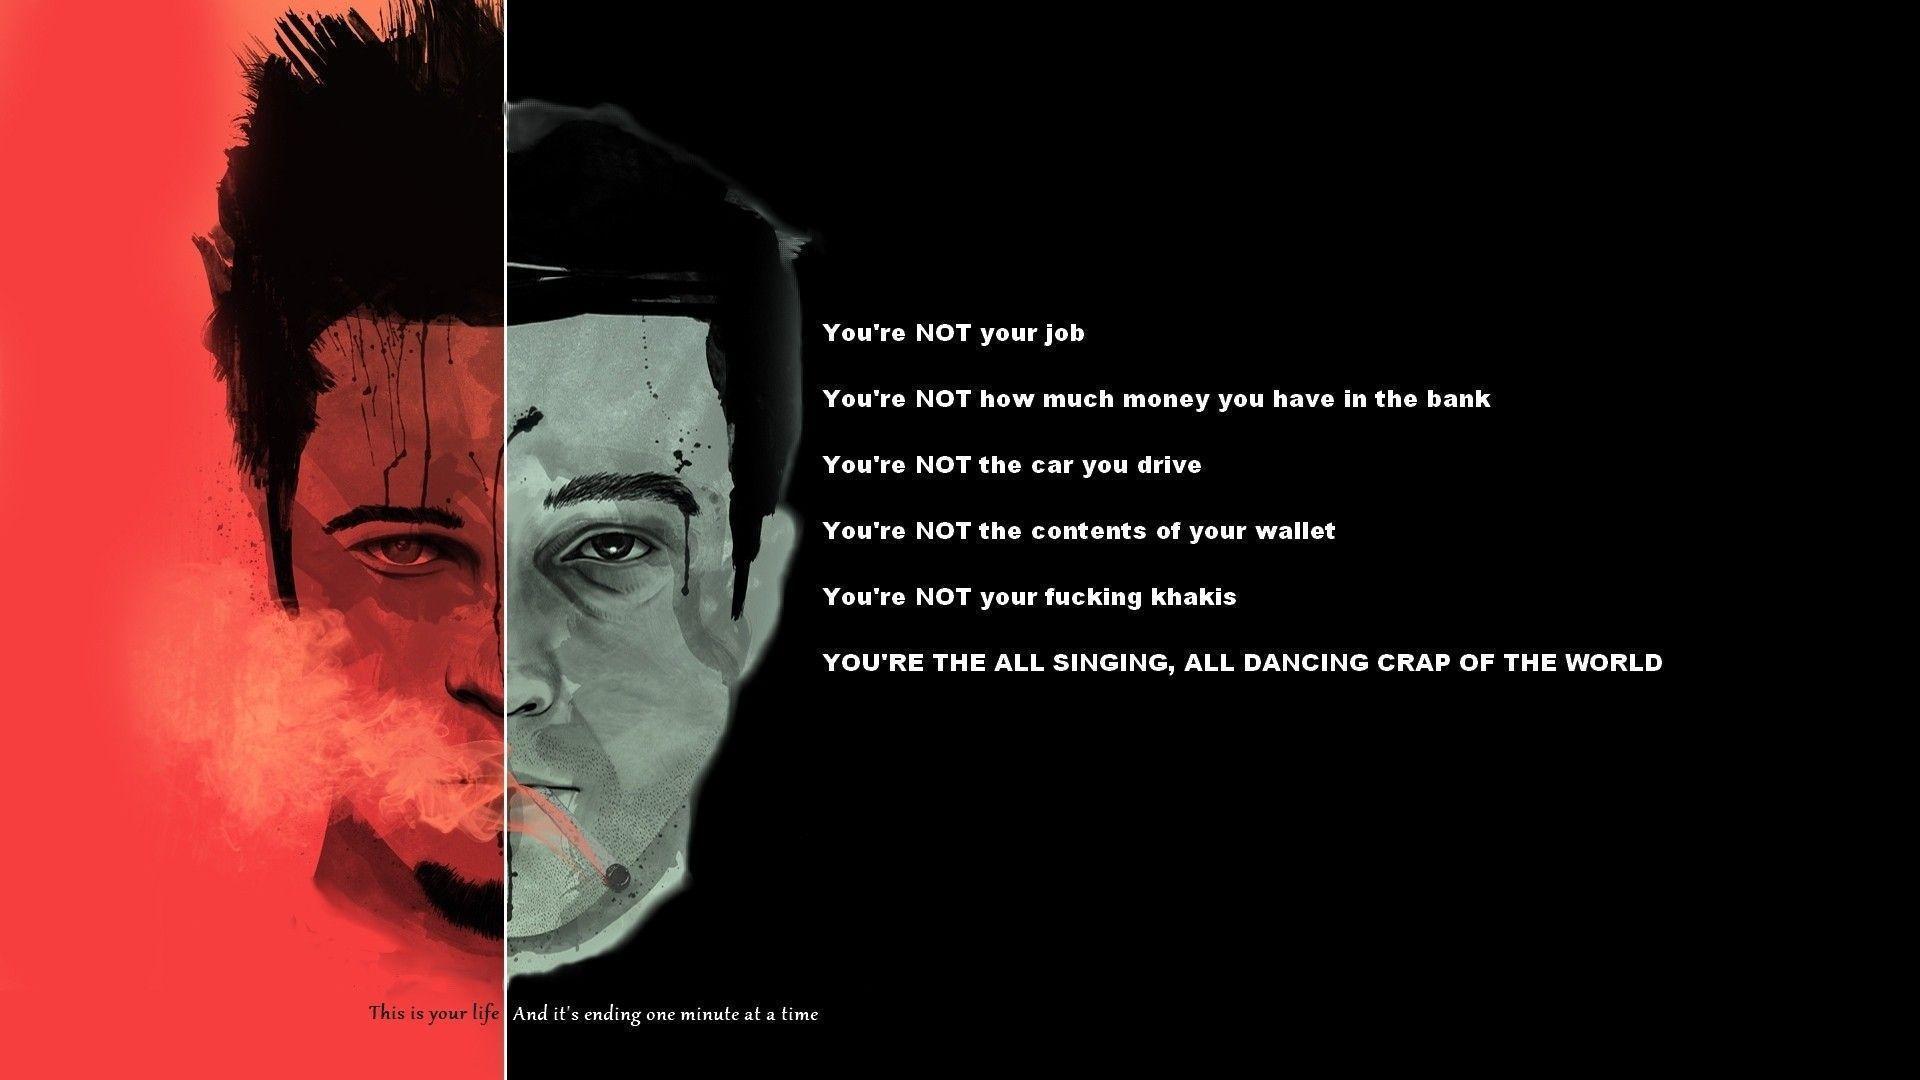 Fight Club Wallpapers